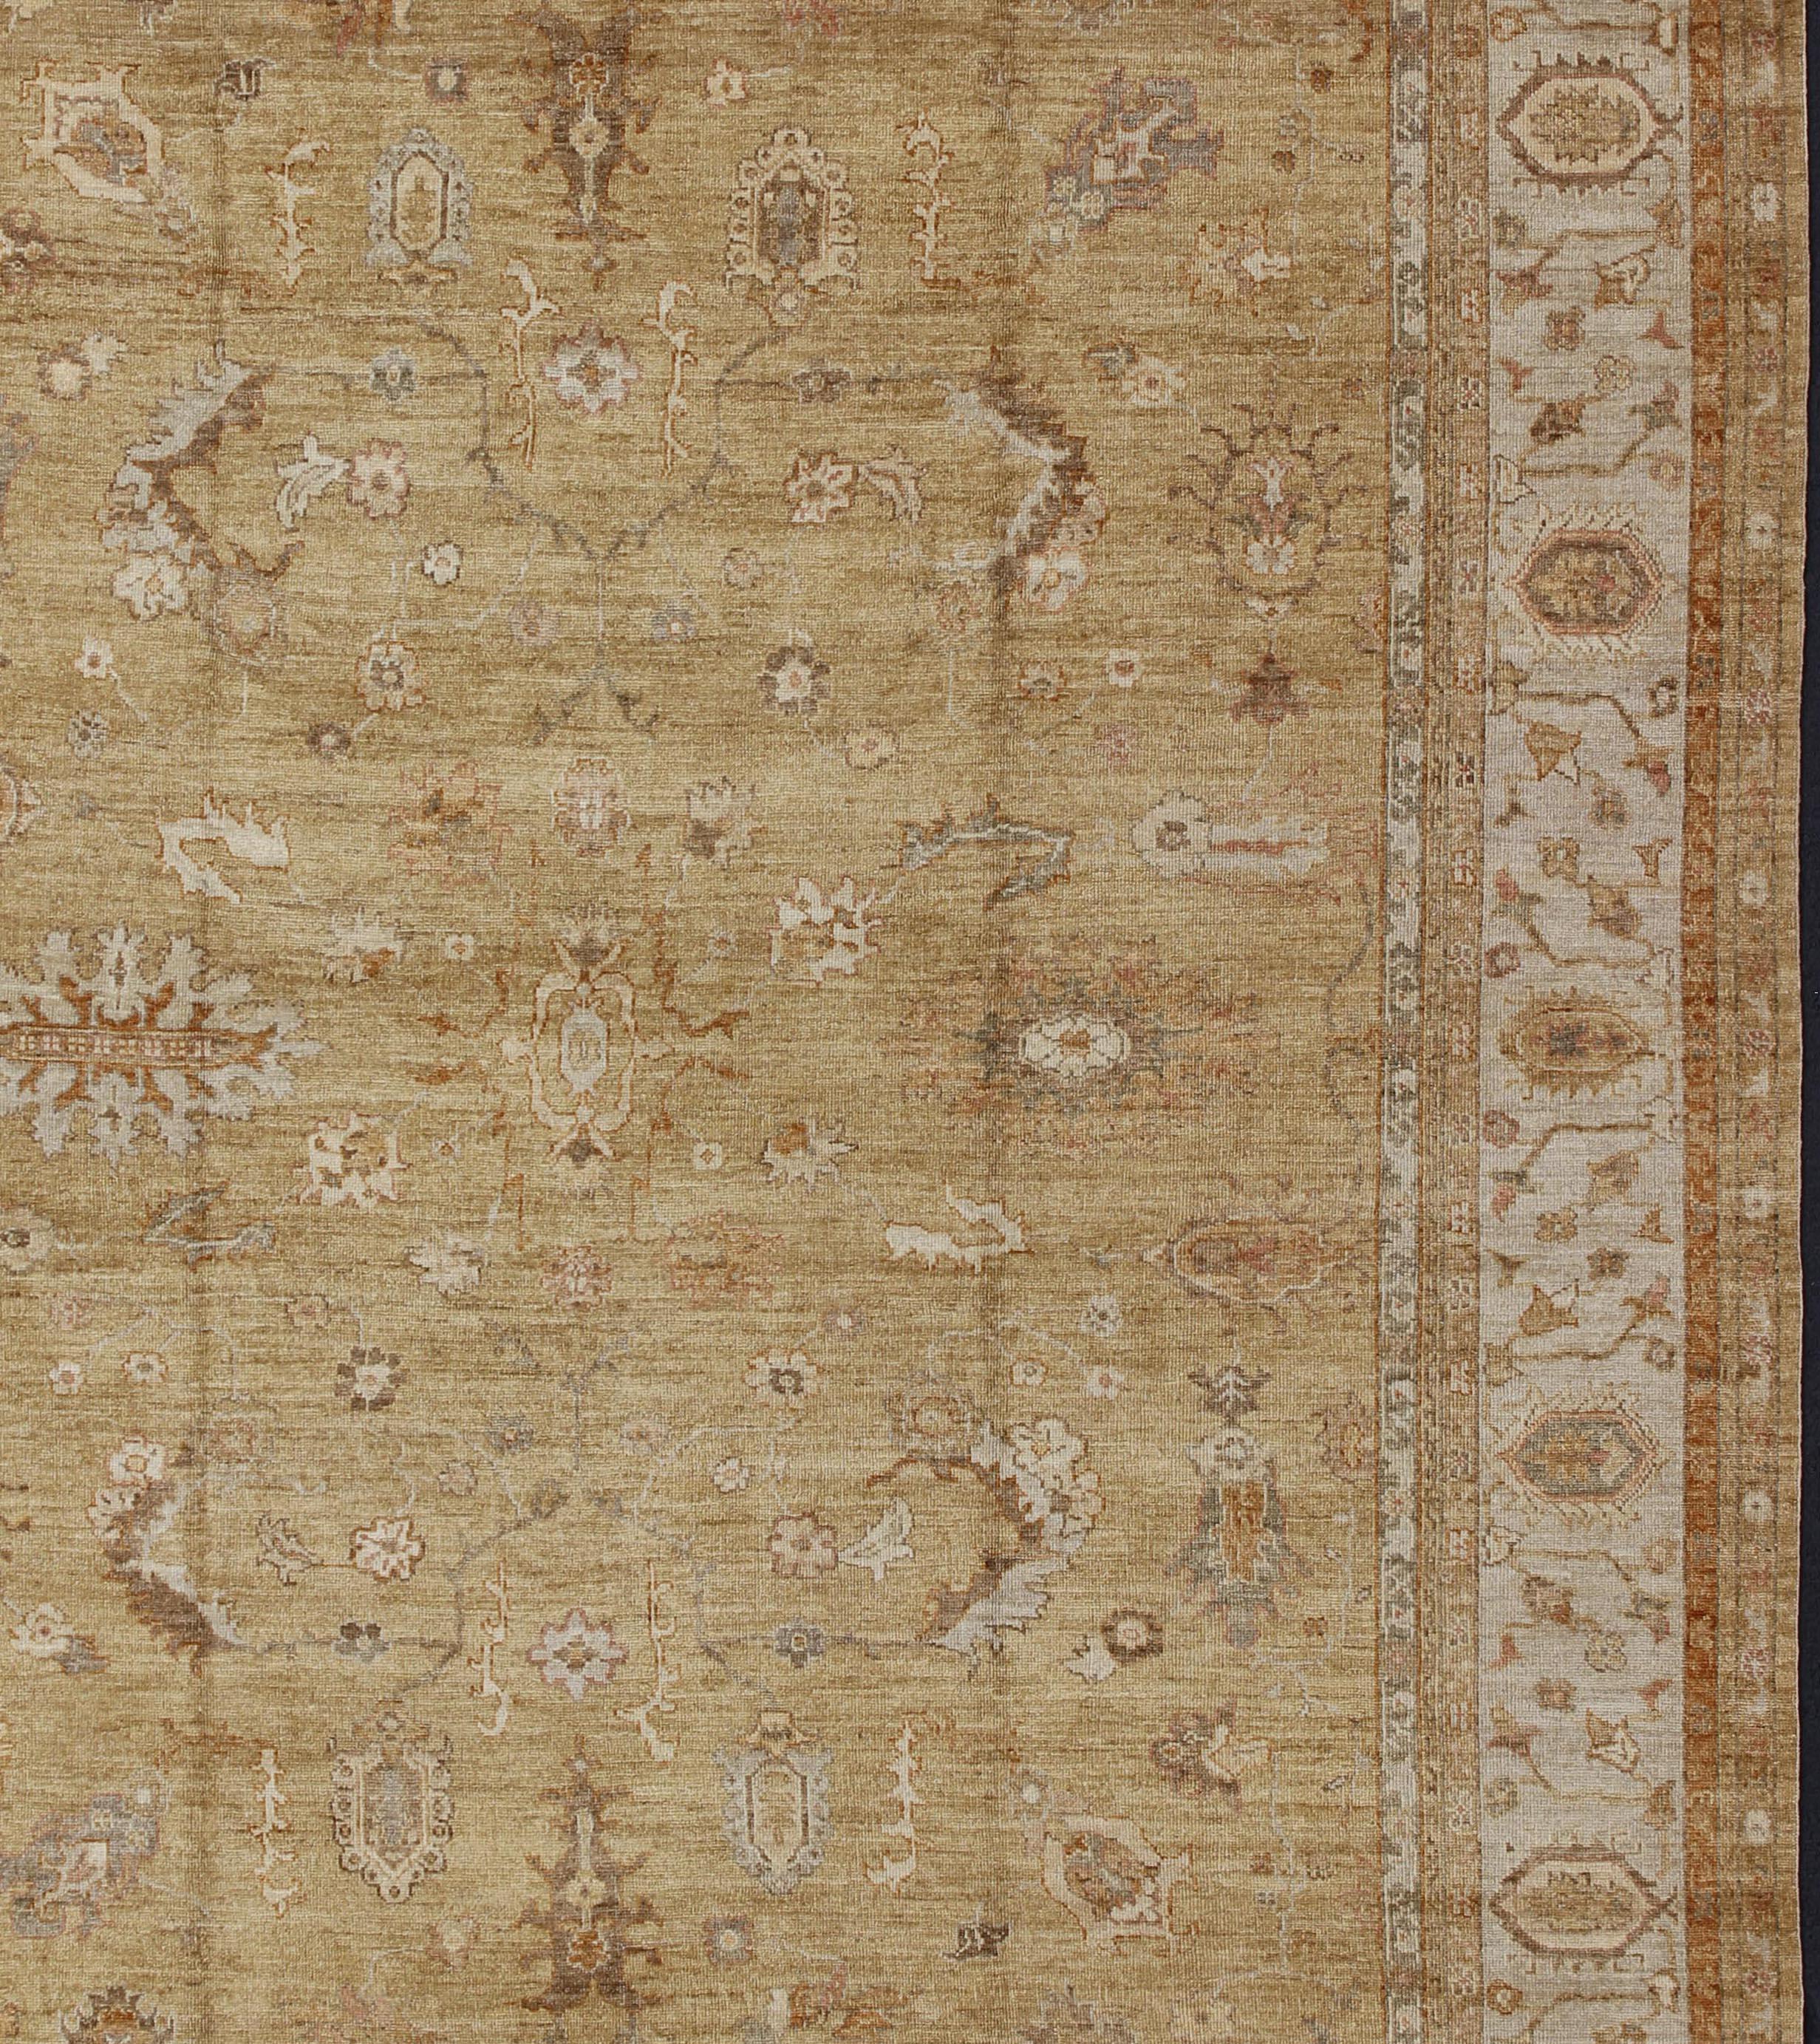 Large Angora Oushak Turkish Rug in Warm Colors of Taupe, Soft Gold, Brown, Cream For Sale 5